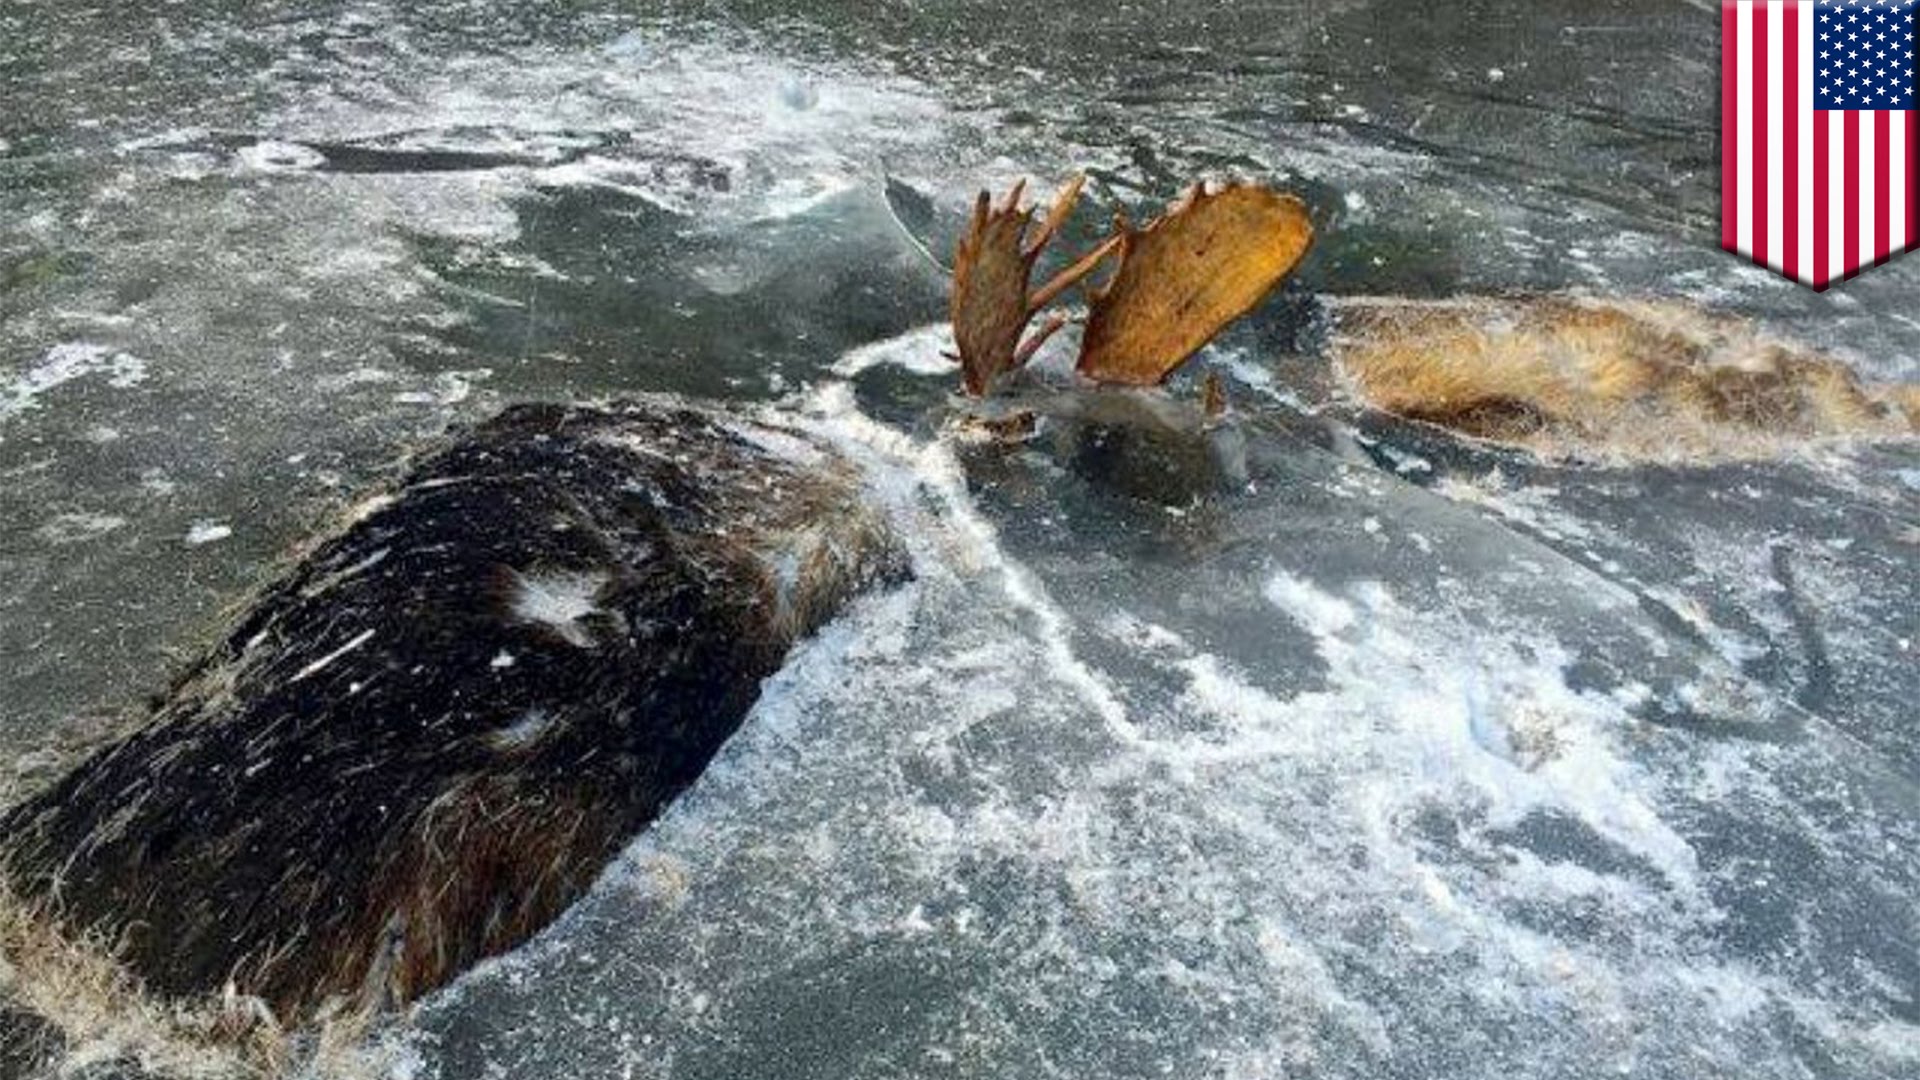 Battle to the death: two moose in Alaska found frozen in ice with ...